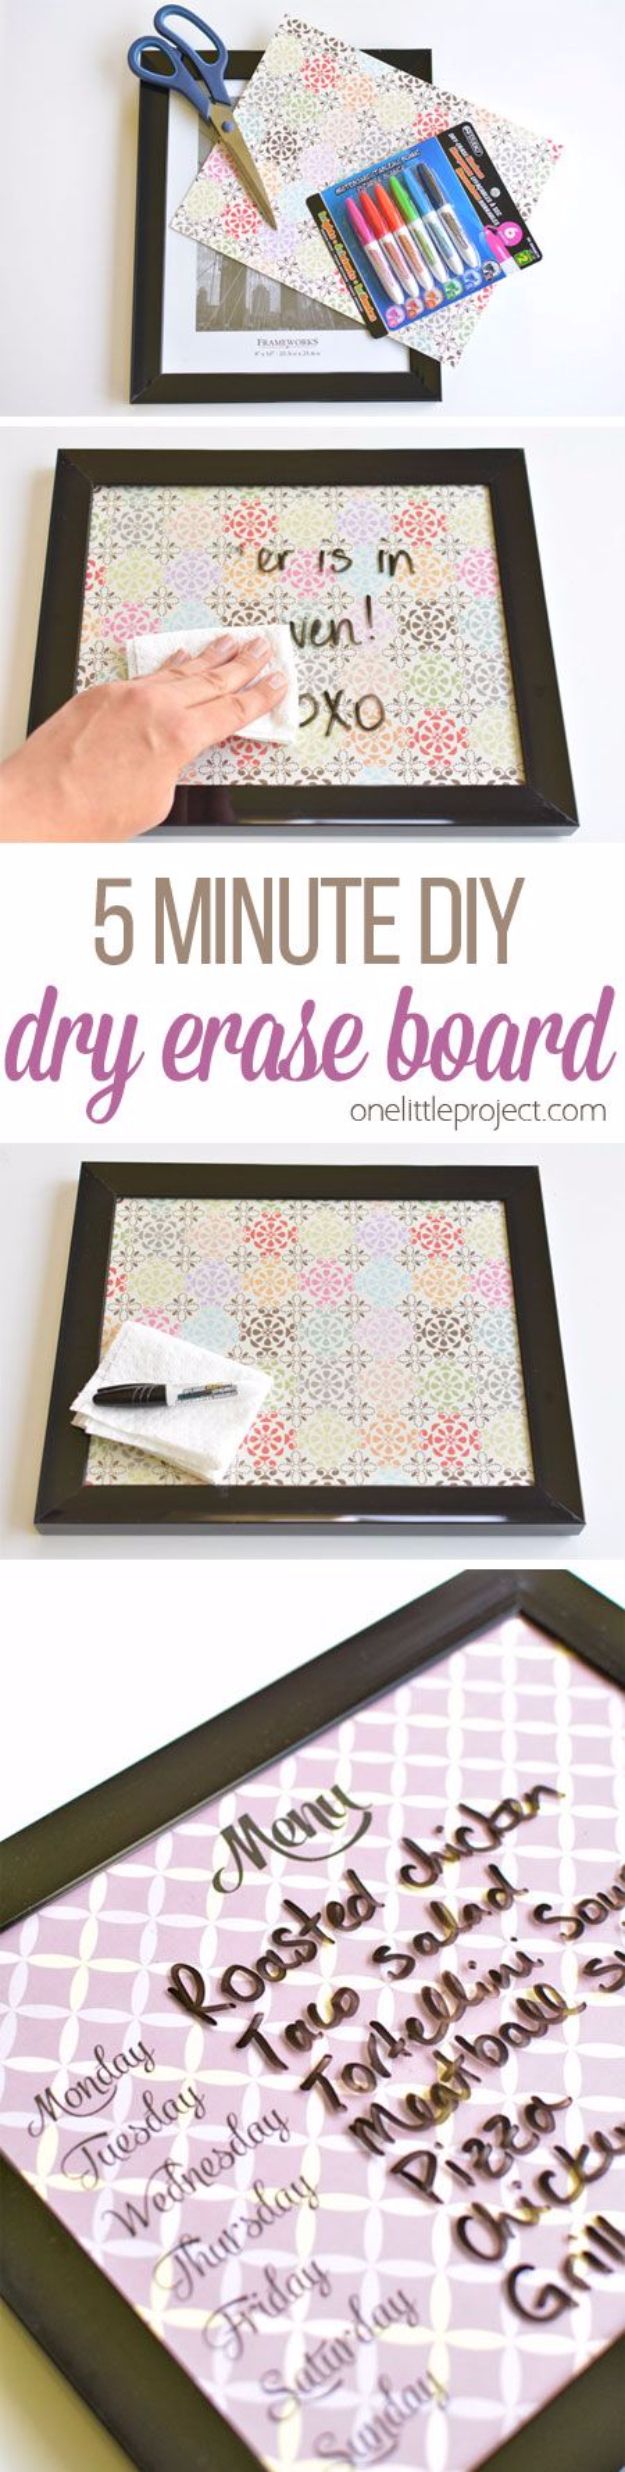 Crafts for Teens to Make and Sell - 5 Minute Dry Erase Board - Cheap and Easy DIY Ideas To Make For Extra Money - Best Things to Sell On Etsy, Dollar Store Craft Ideas, Quick Projects for Teenagers To Make Spending Cash - DIY Gifts, Wall Art, School Supplies, Room Decor, Jewelry, Fashion, Hair Accessories, Bracelets, Magnets #teencrafts #craftstosell #etsyideass